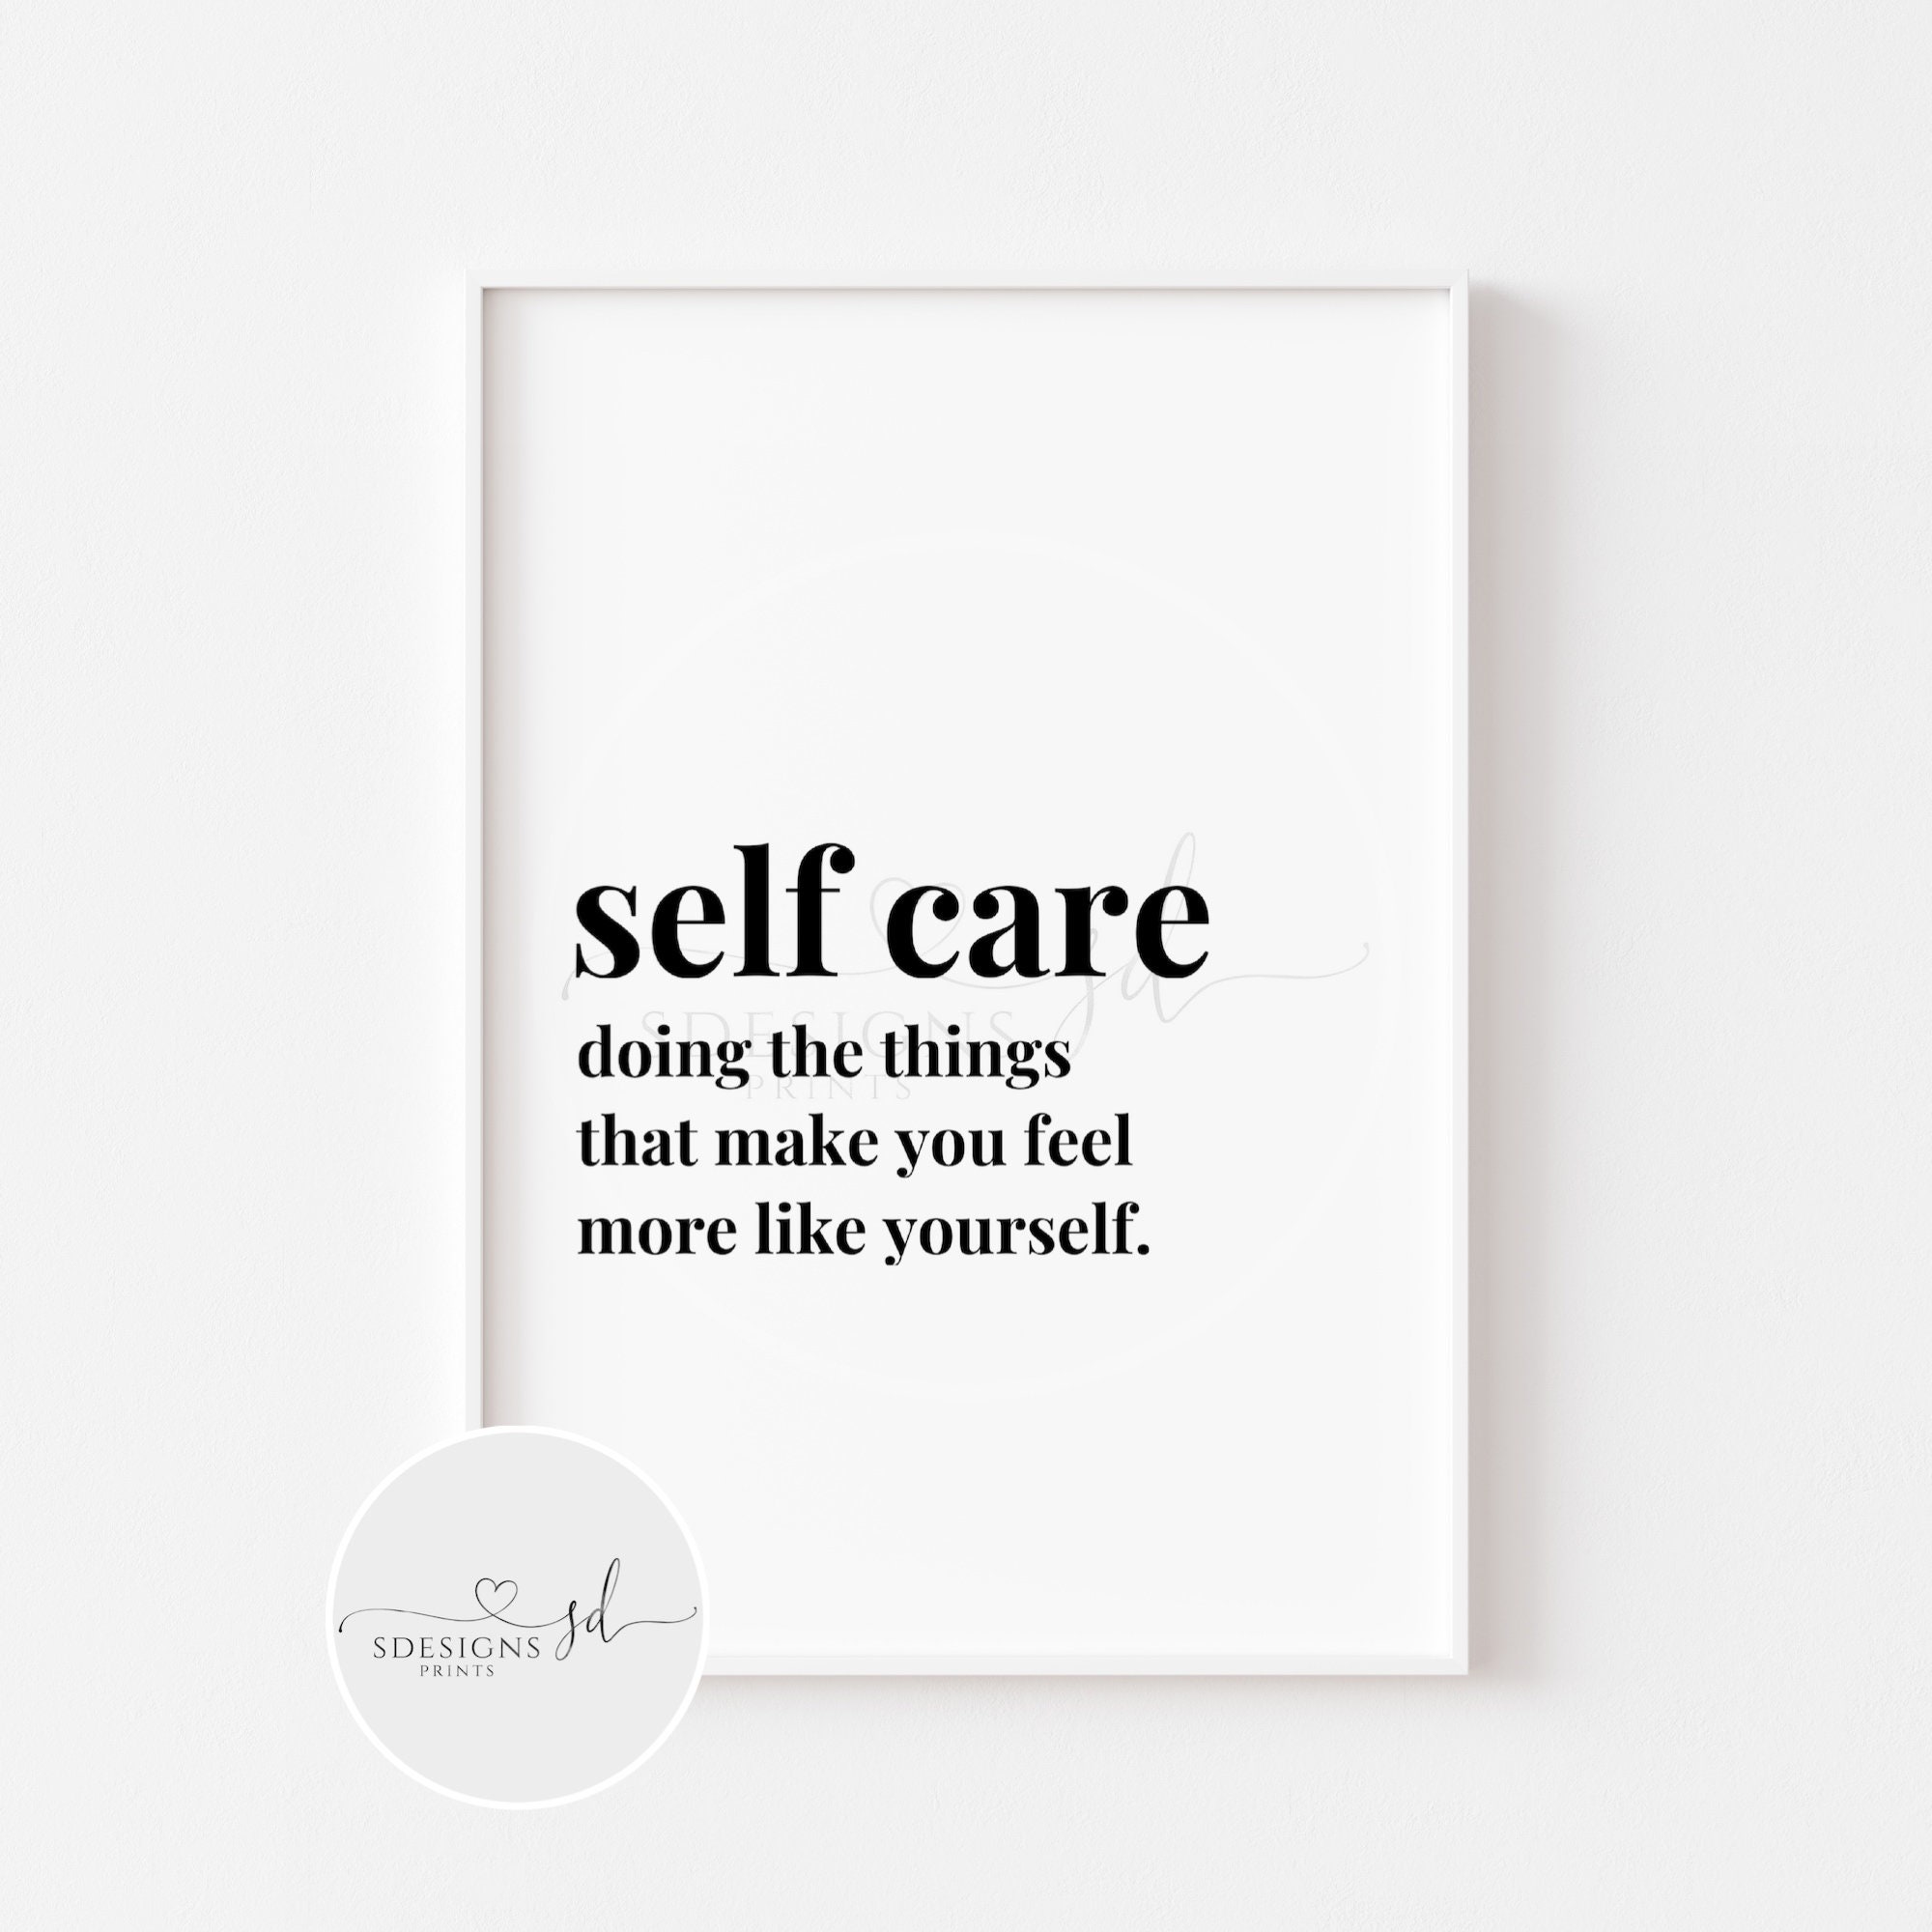 Self Care Print Self Care Definition Inspirational Quote Motivational Quote  Affirmation Positive Wall Art Home Decor -  Canada